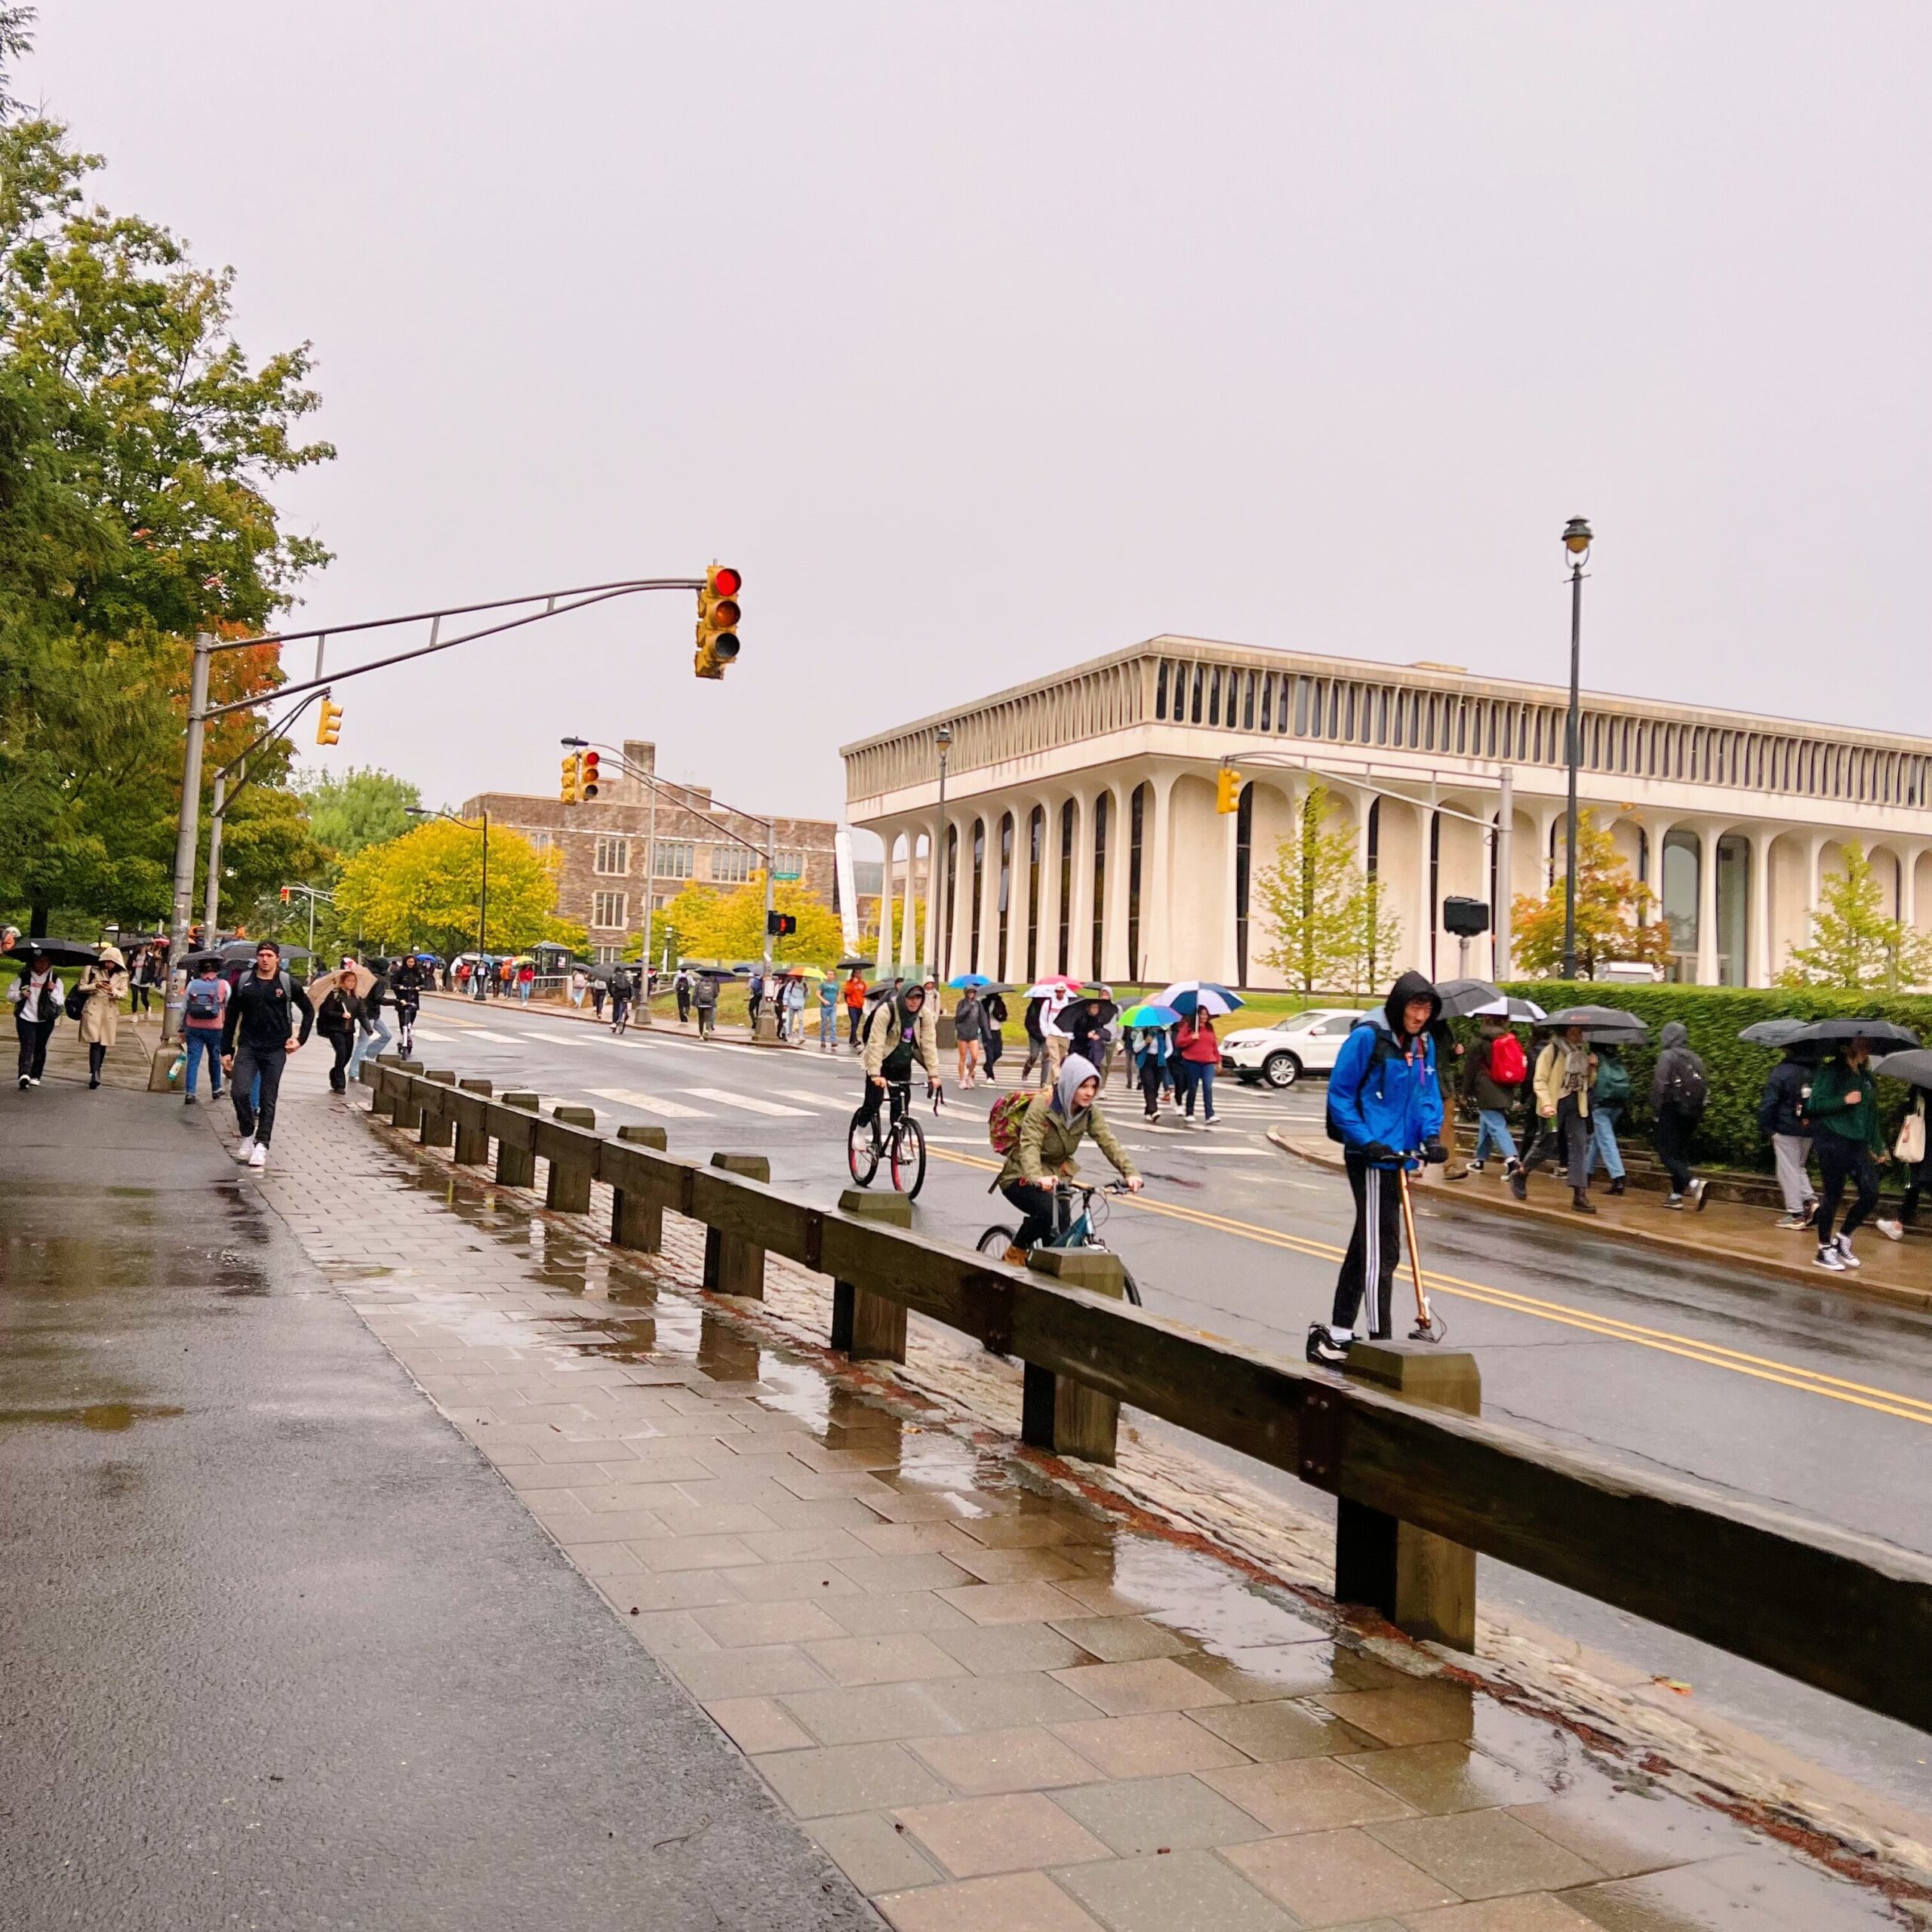 Photograph of Princeton University in the rain, with many students walking, biking, and scootering to class holding umbrellas or wearing rain jackets